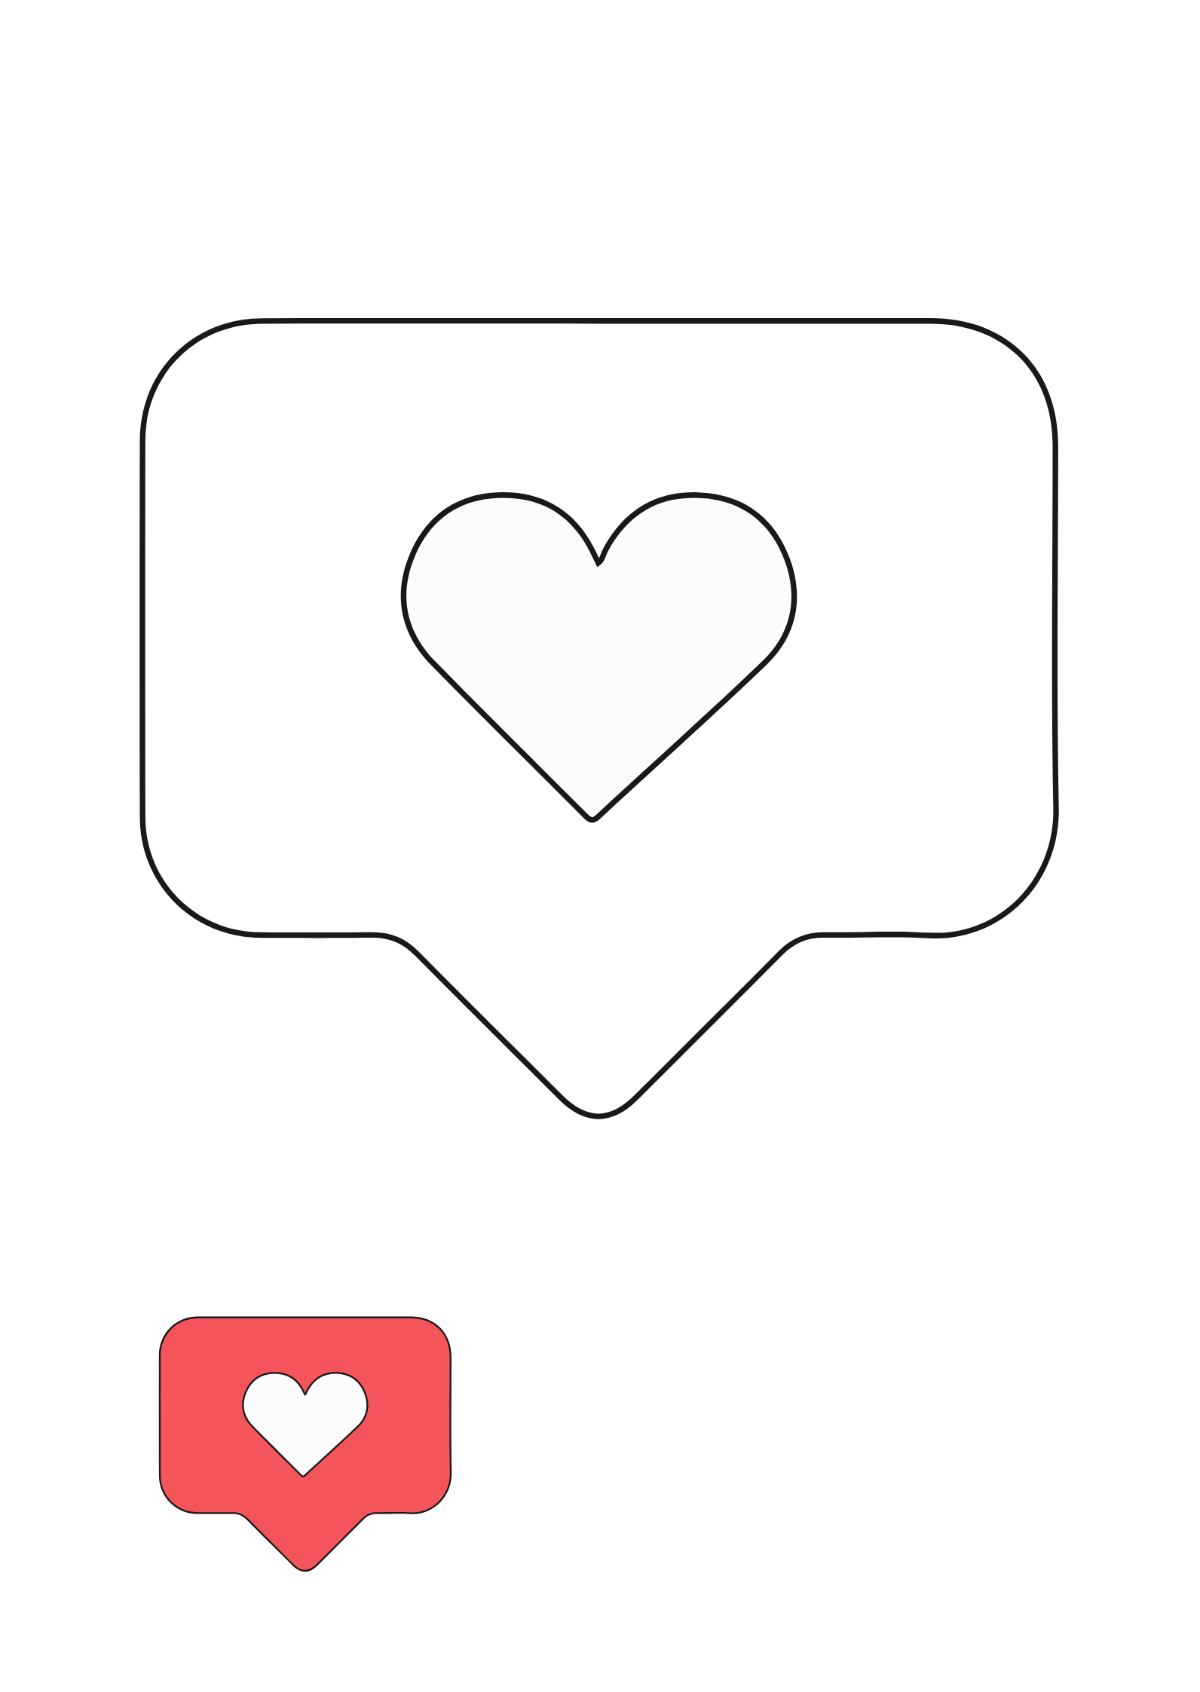 Instagram Heart Coloring Page Template